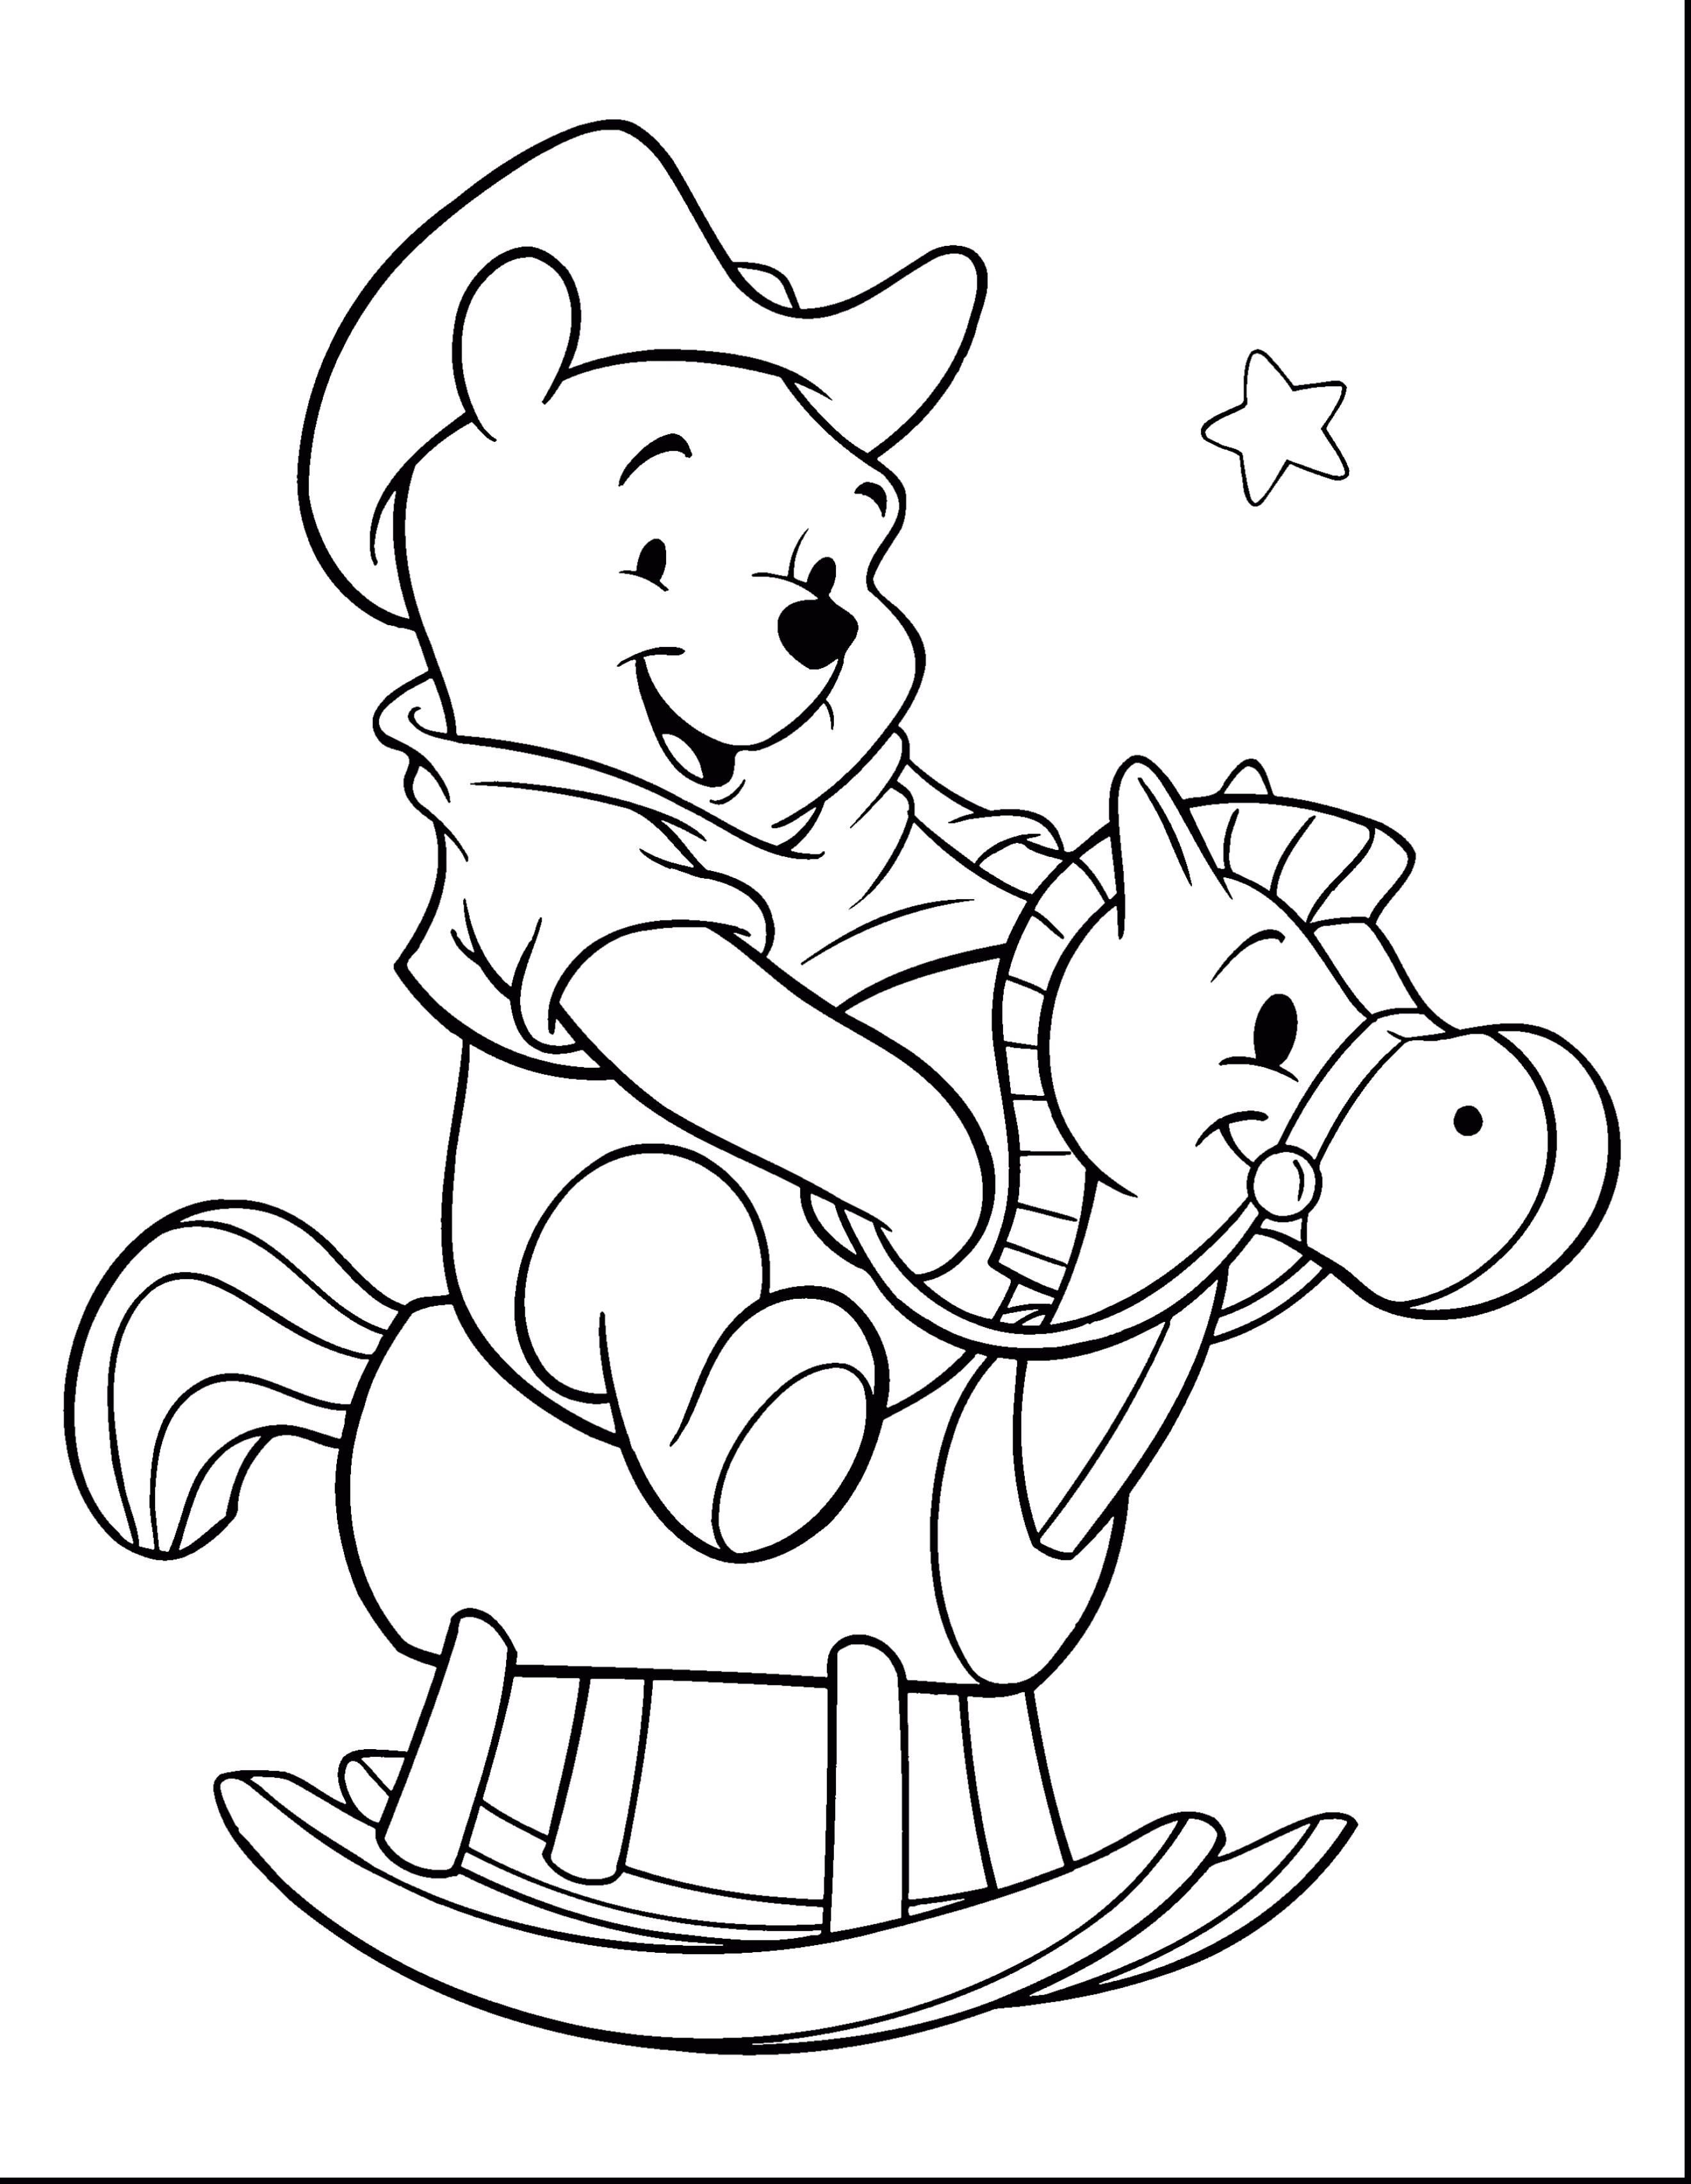 Winnie The Pooh Coloring Pages Online Pooh Bear Coloring Pages Telematik Institut